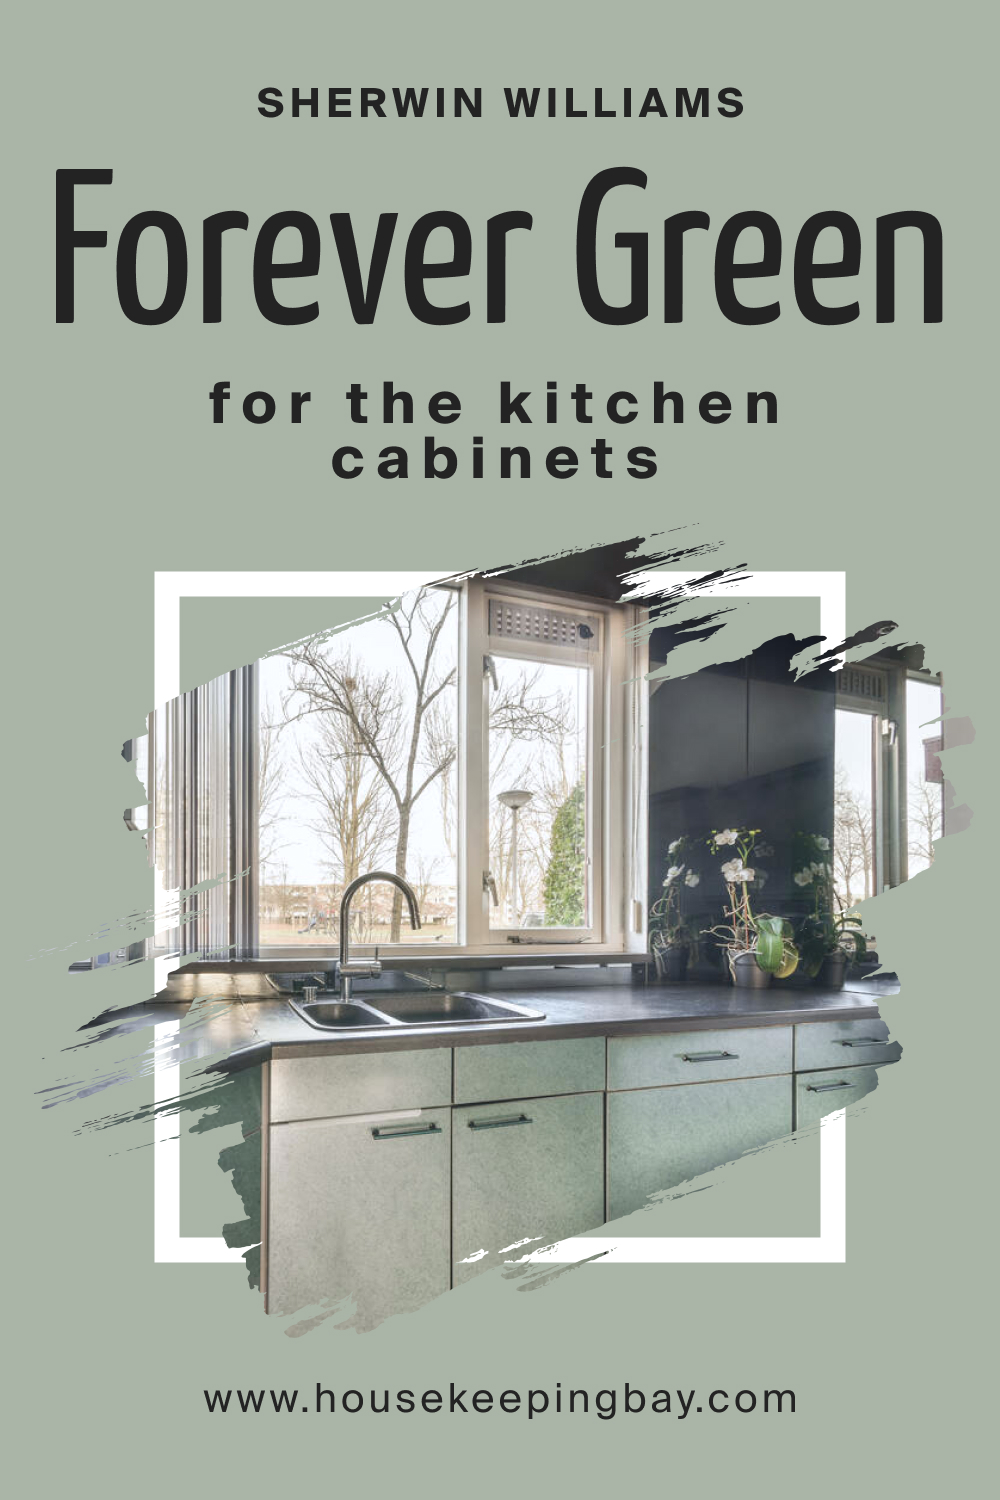 Sherwin Williams. SW 9653 Forever Green For the Kitchen Cabinets